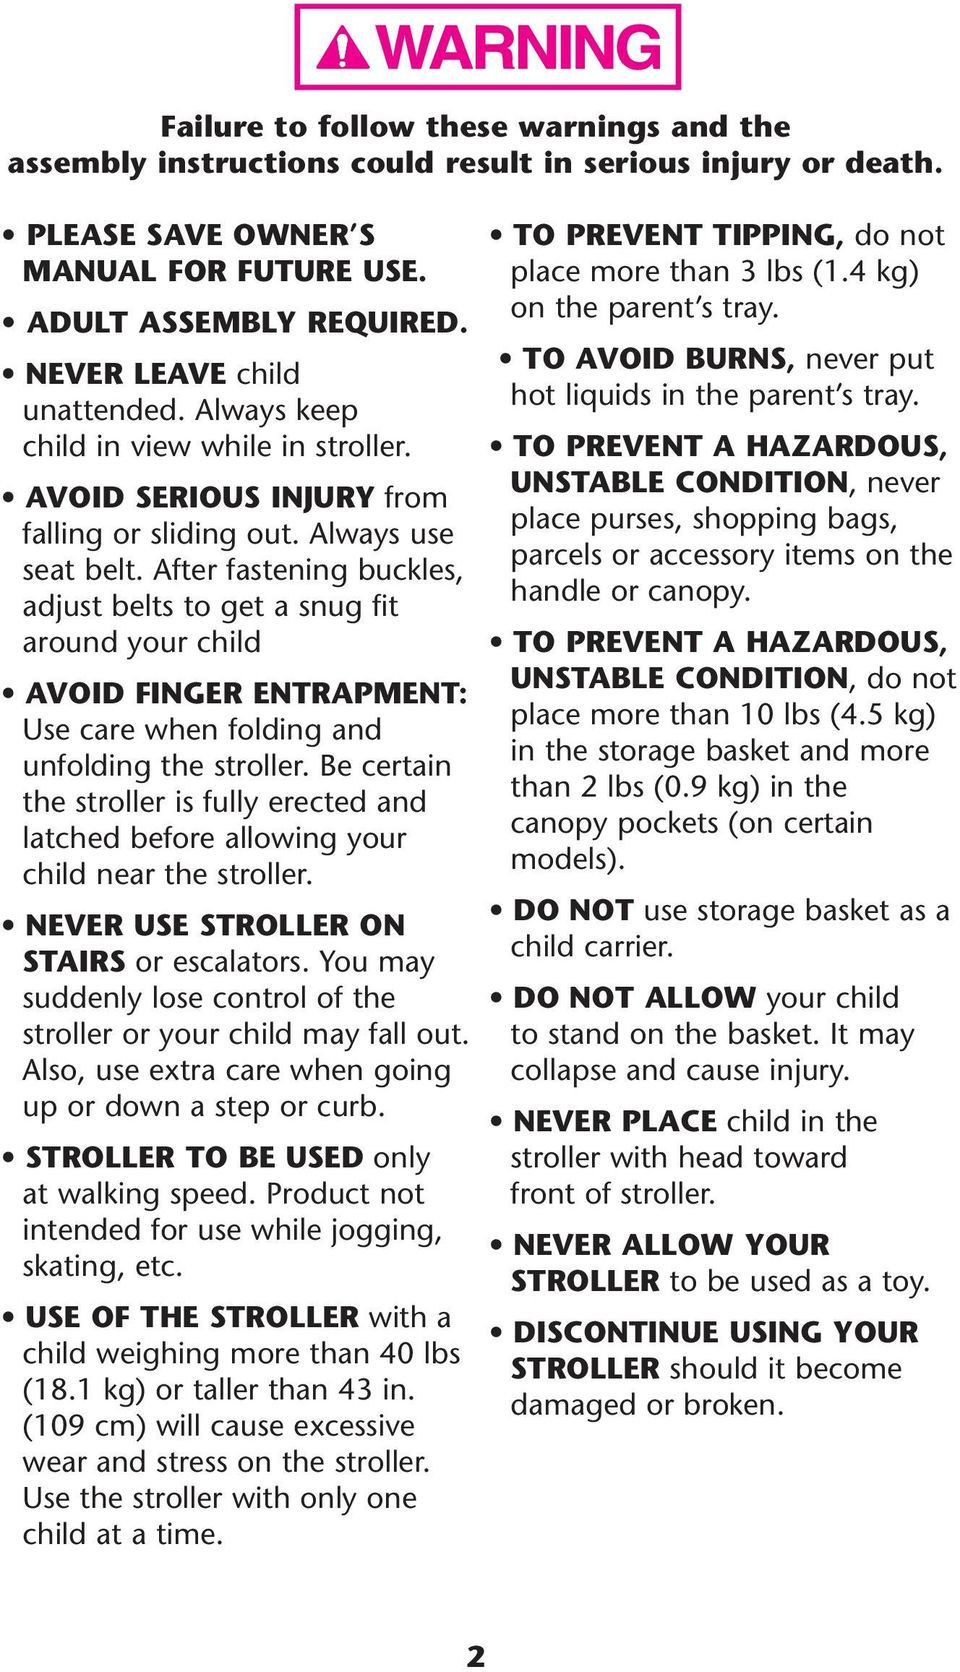 After fastening buckles, adjust belts to get a snug fit around your child AVOID FINGER ENTRAPMENT: Use care when folding and unfolding the stroller.